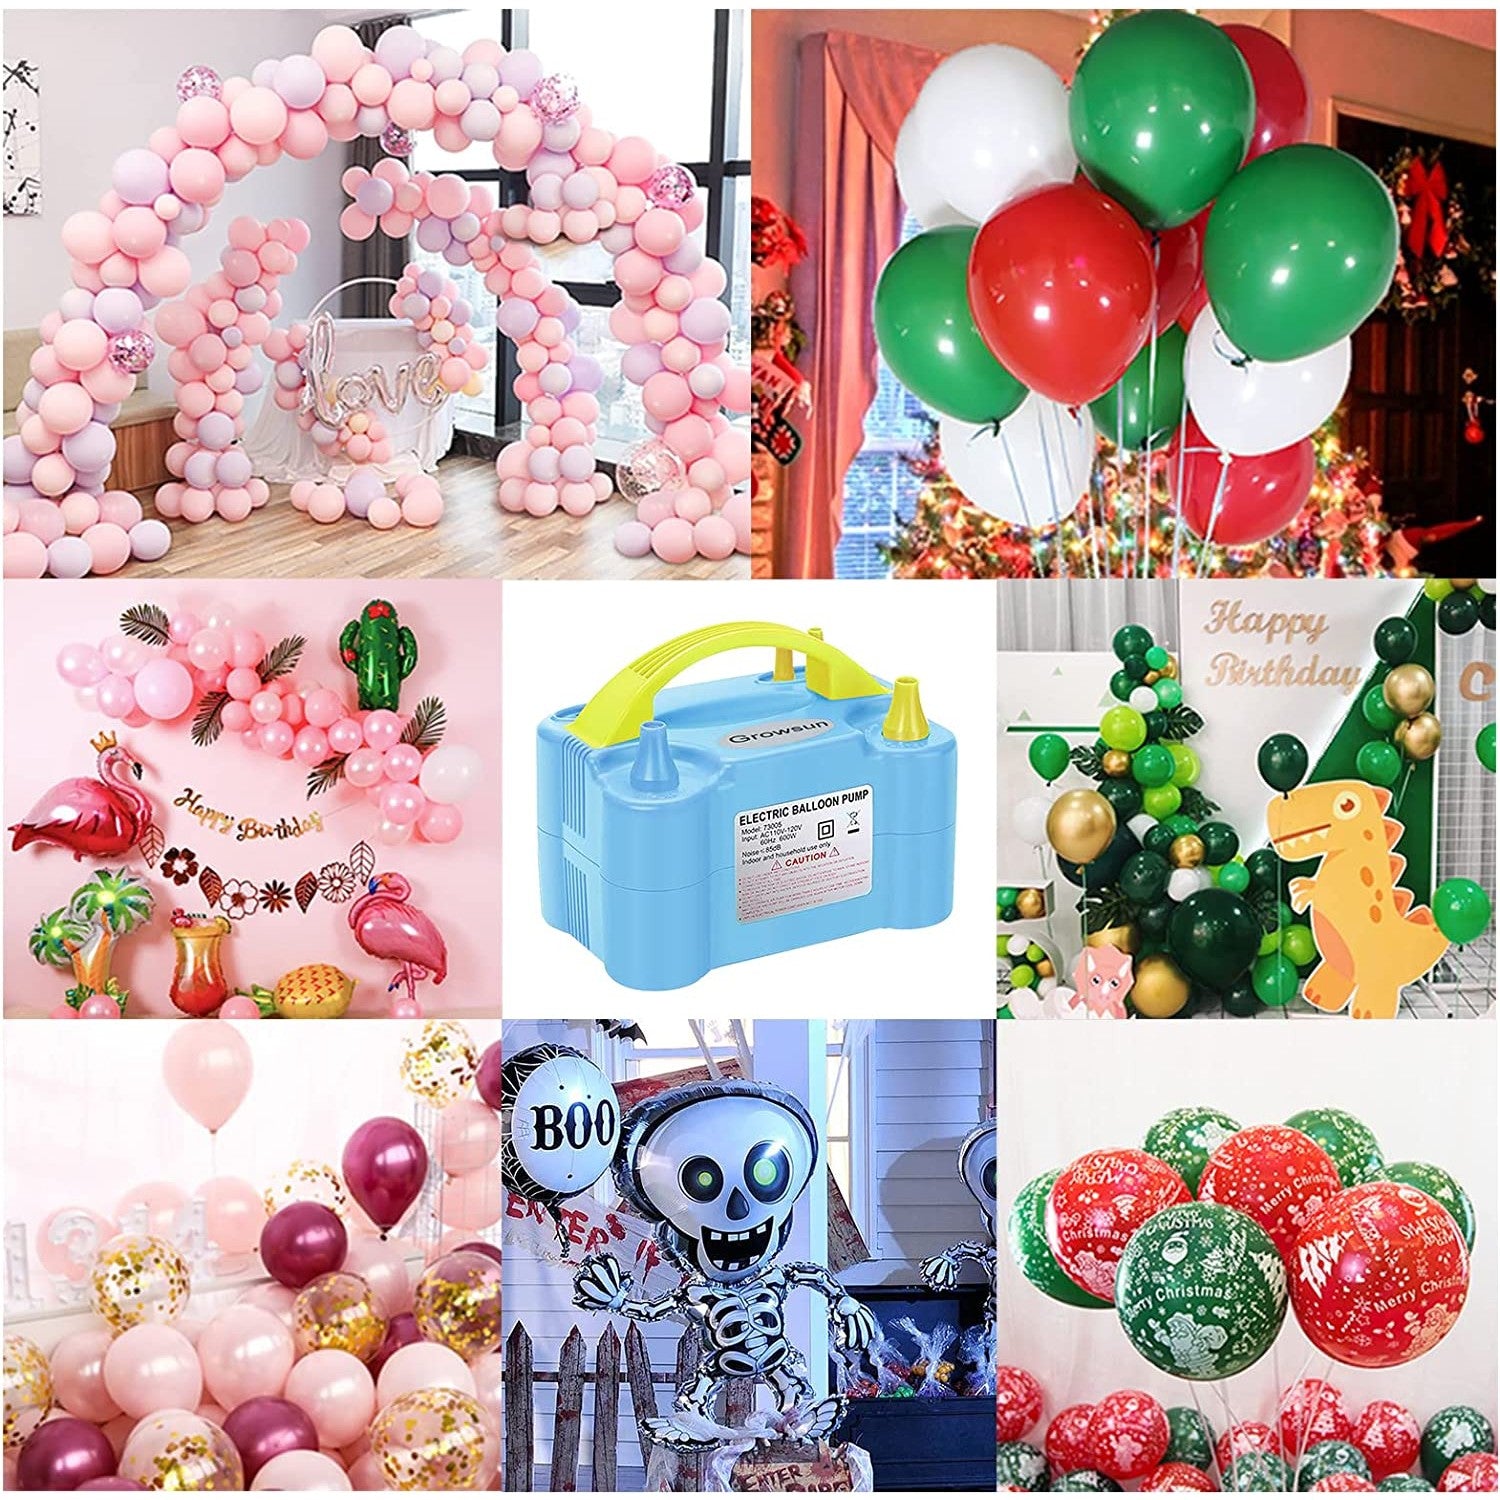 A collage of images showing various locations decorated with balloons with an electric balloon pump in the centre of the collage.